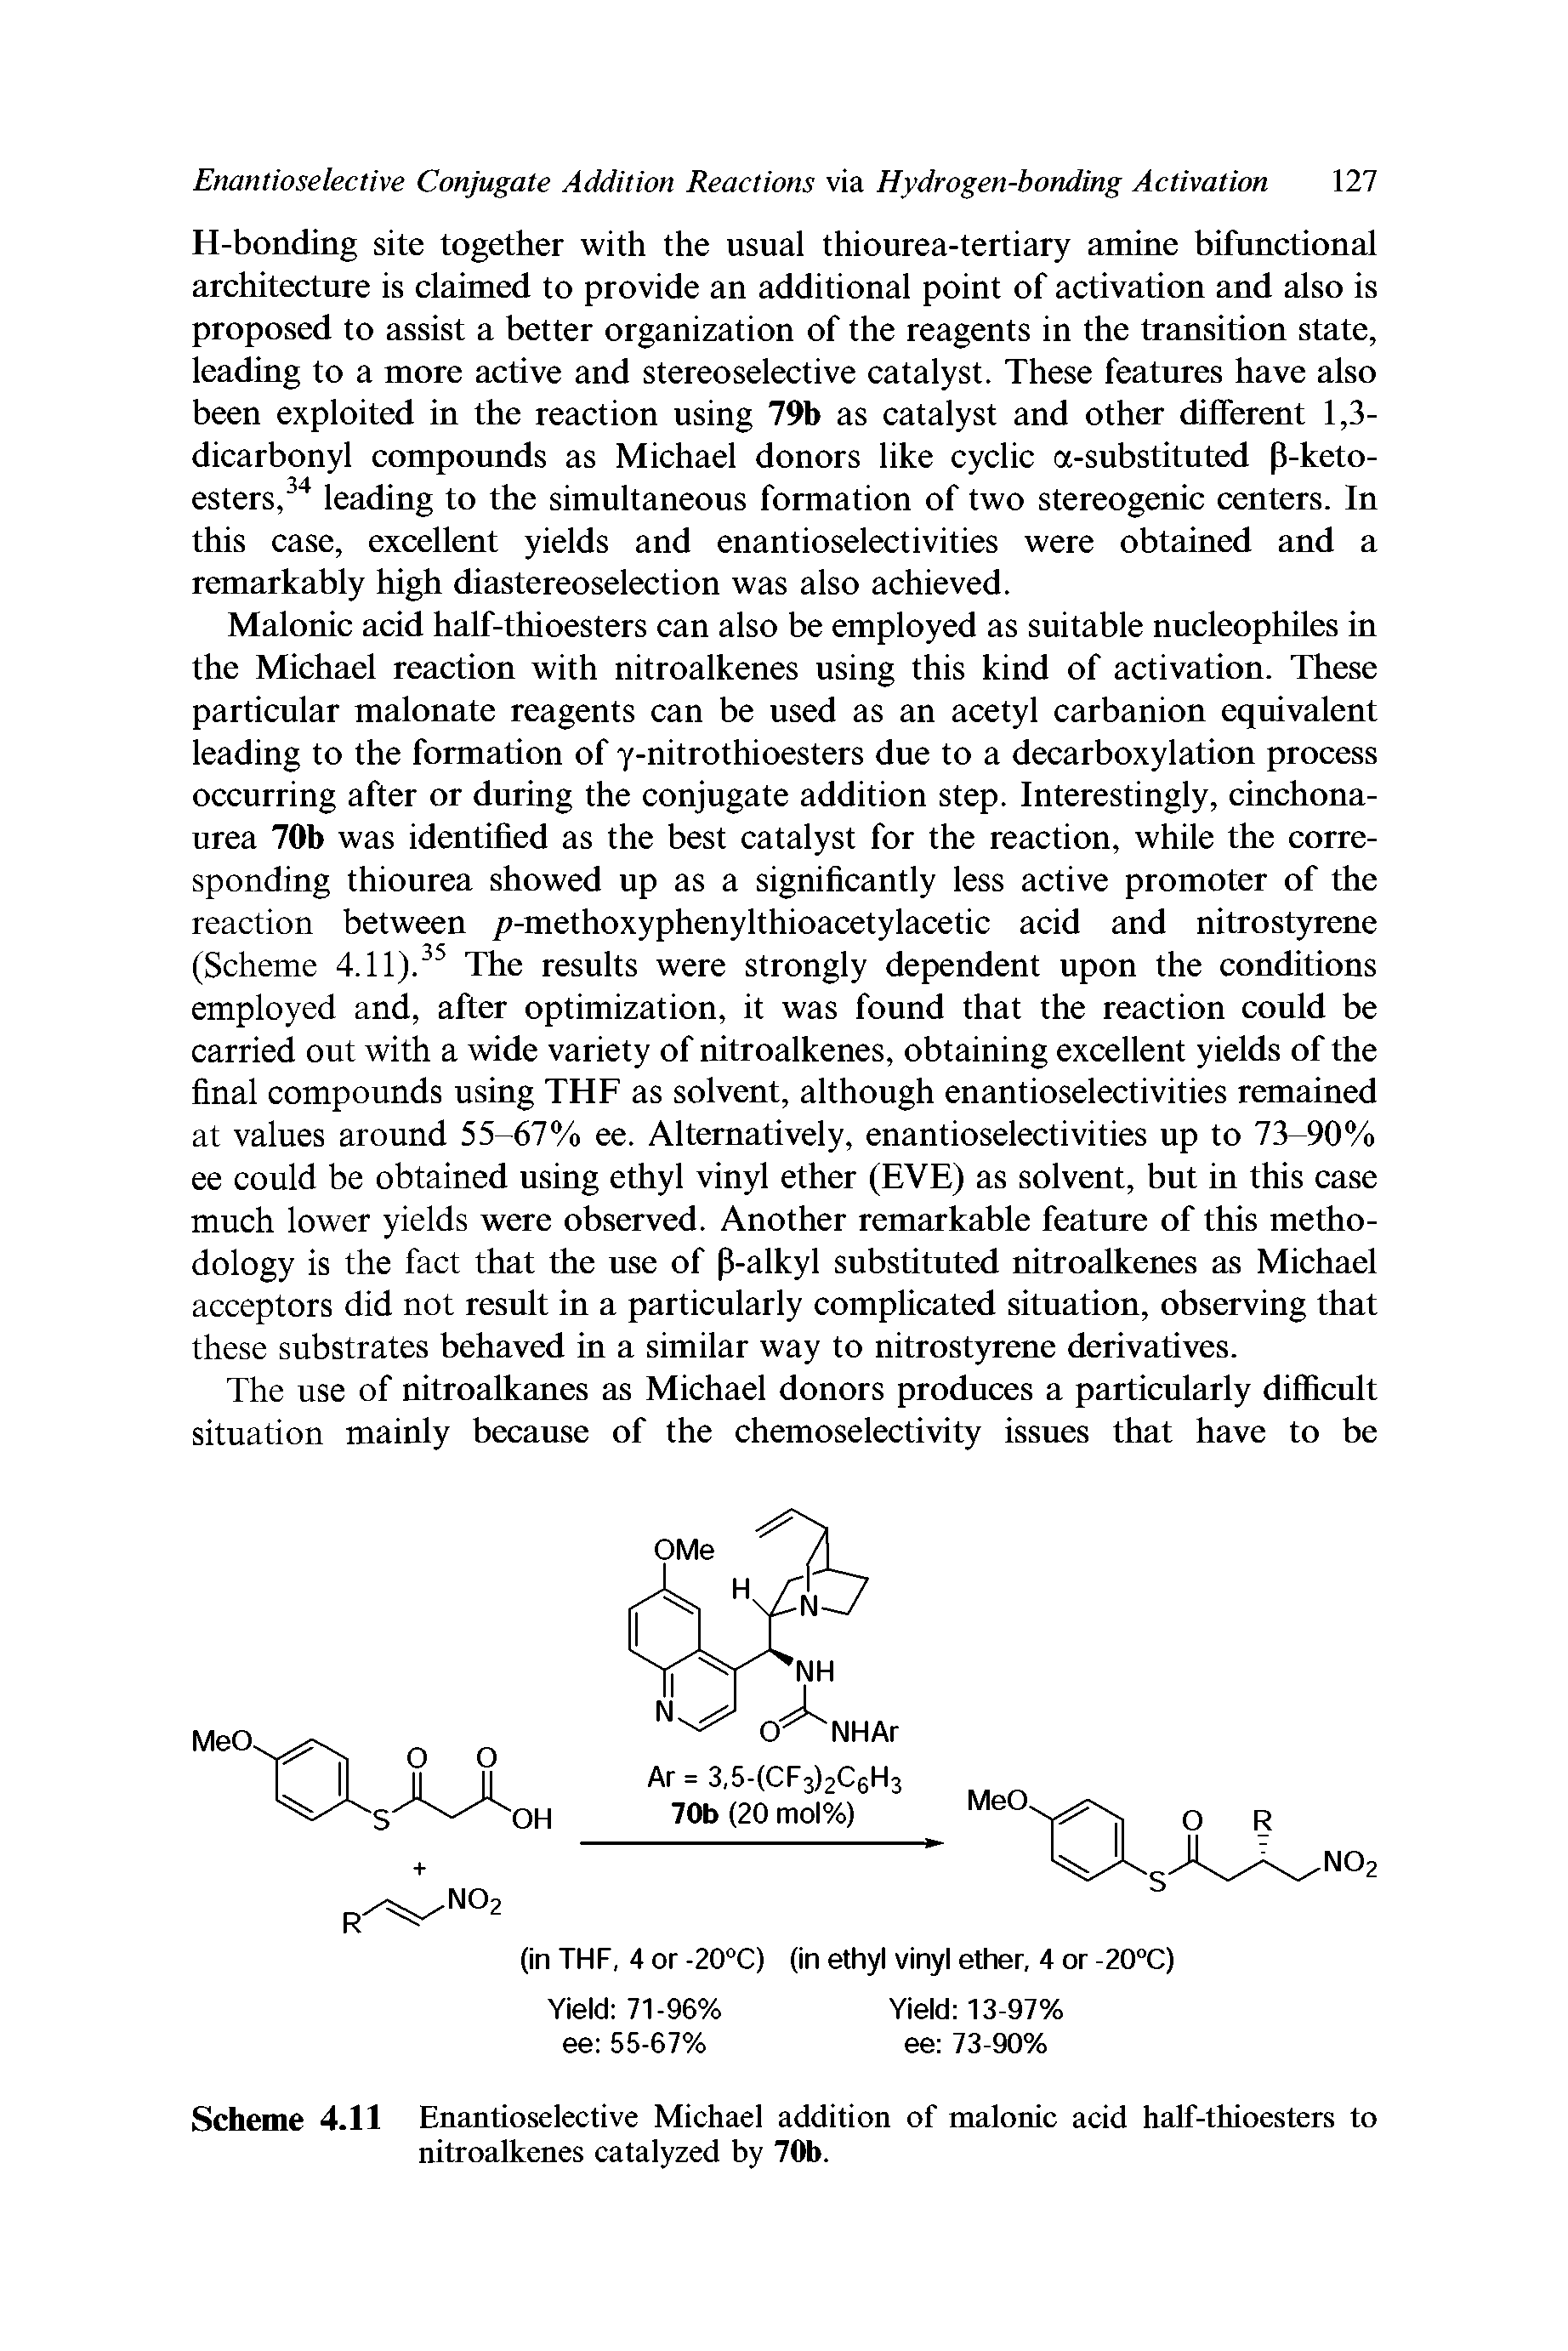 Scheme 4.11 Enantioselective Michael addition of malonic acid half-thioesters to nitroalkenes catalyzed by 70b.